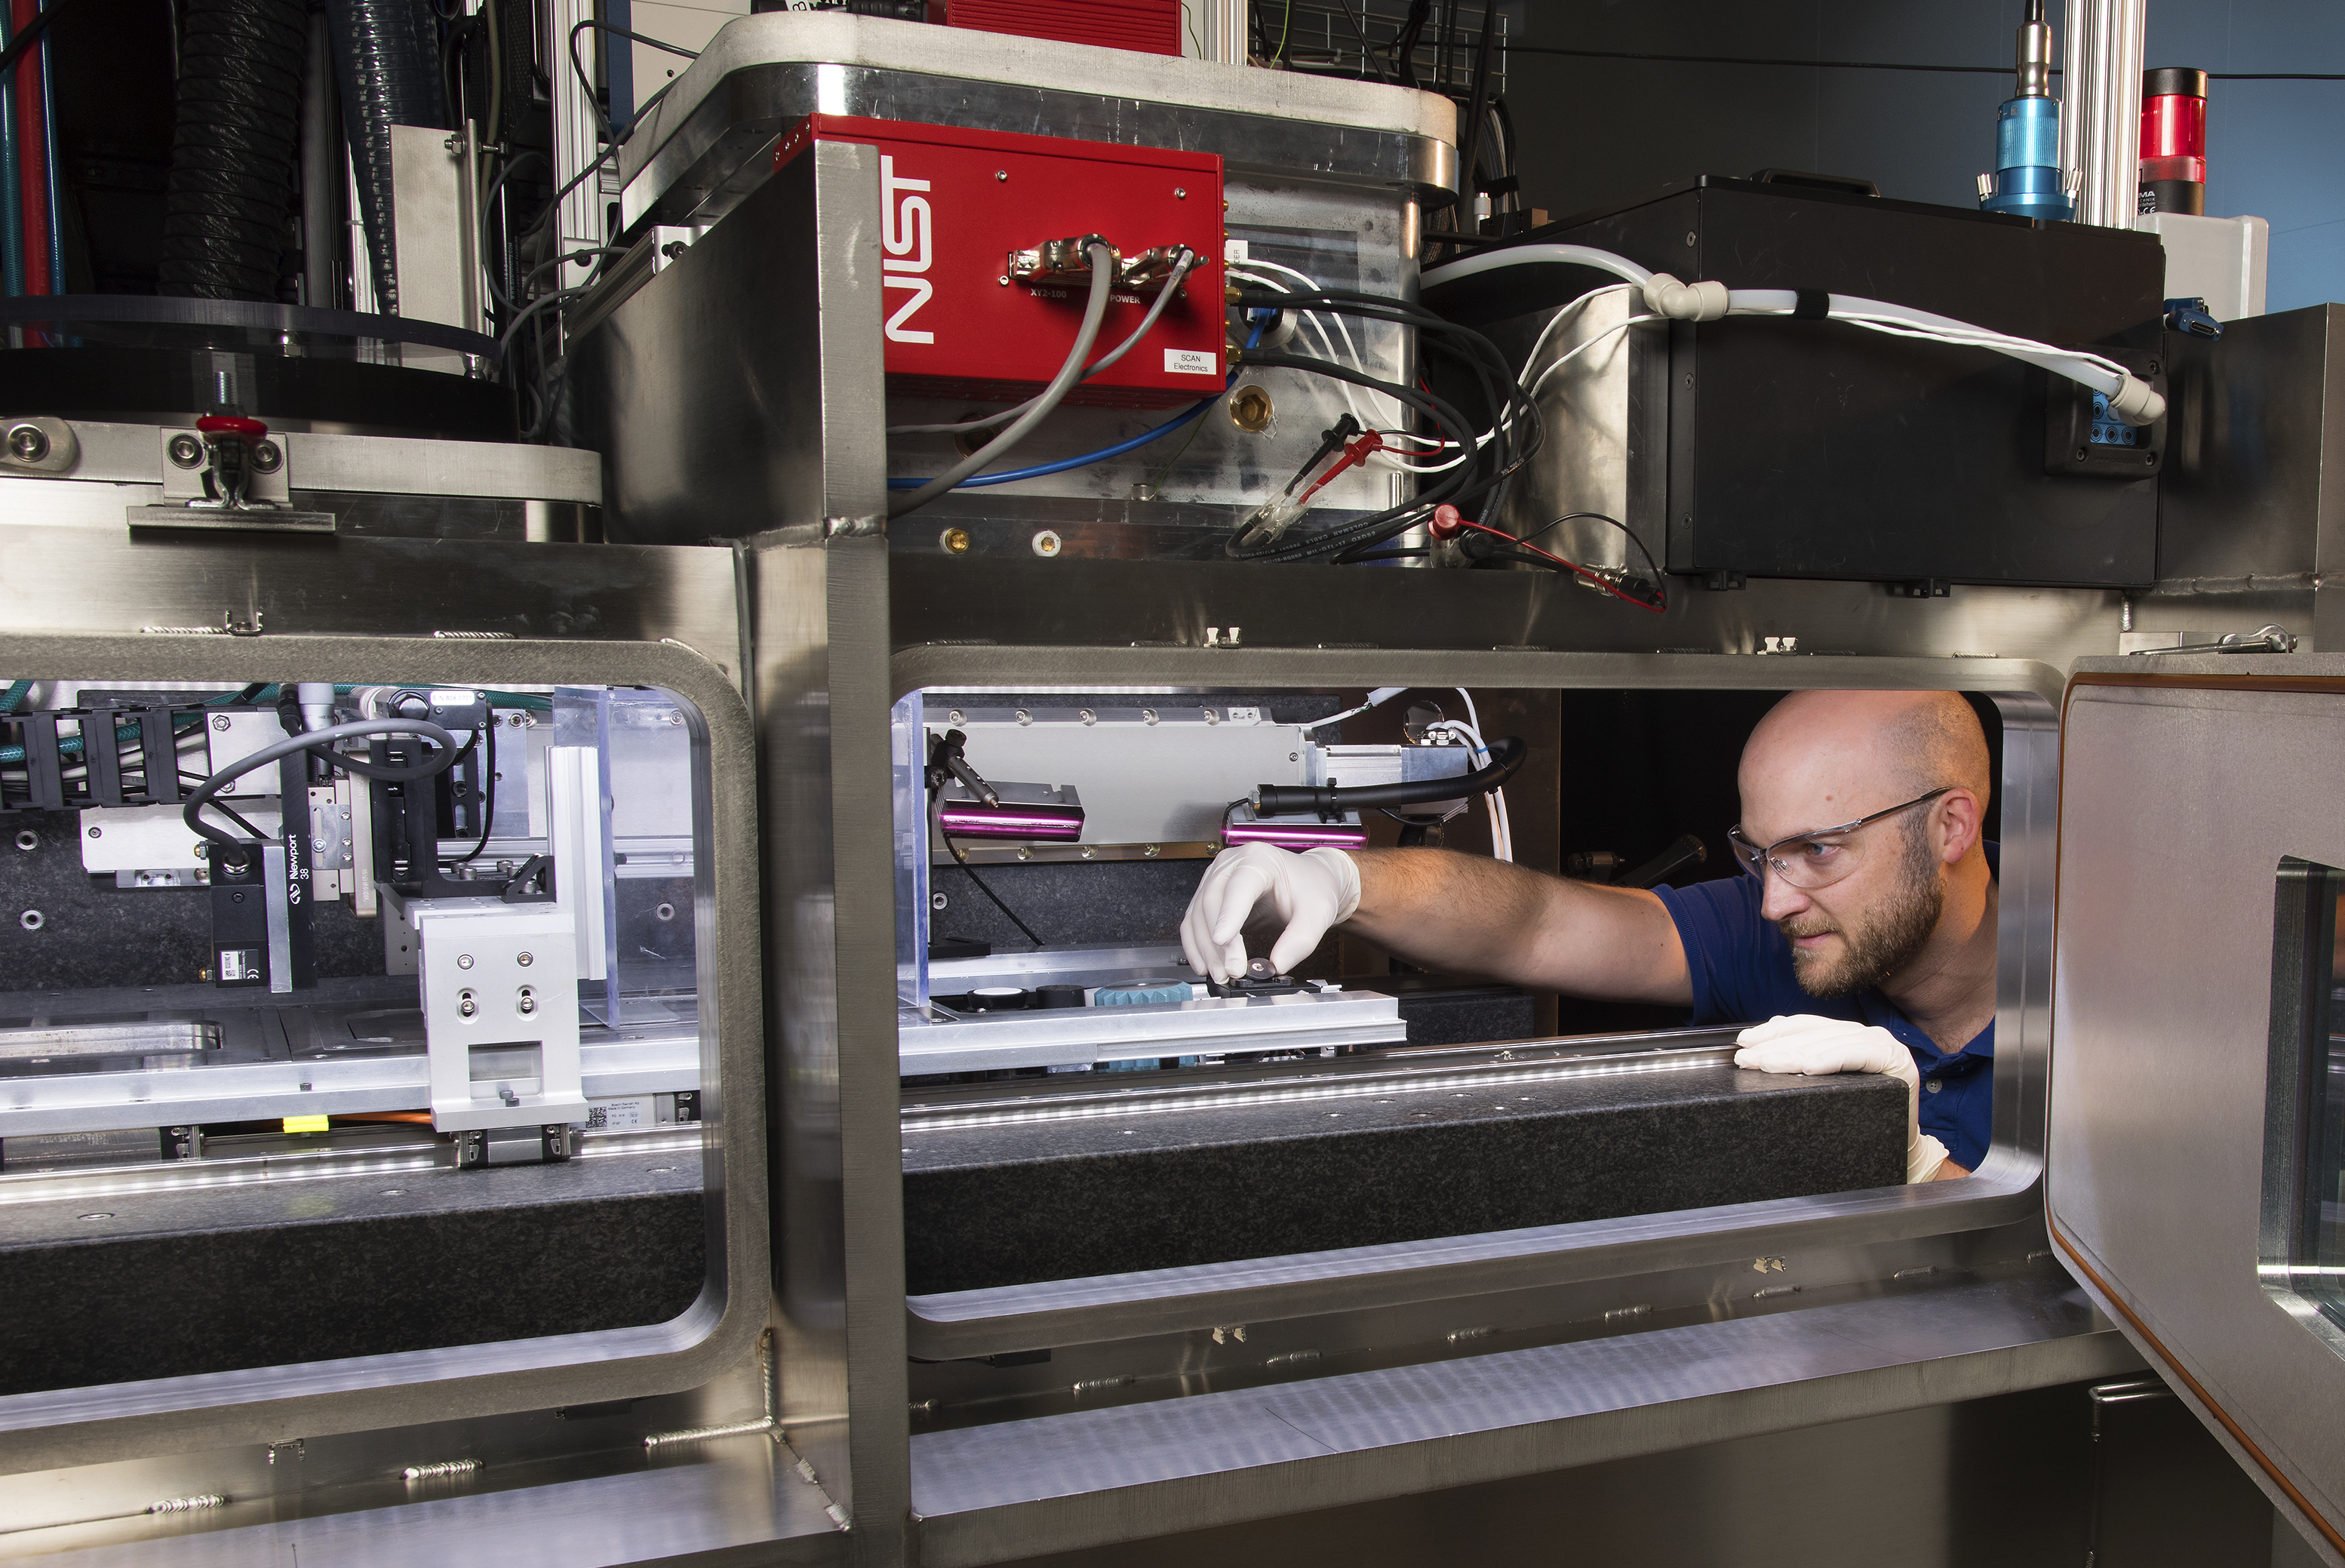 NIST has issued just under $4million in grants to projects that aim to develop industry standards for metal 3D printing. Photo via NIST, Earl Zubkoff.